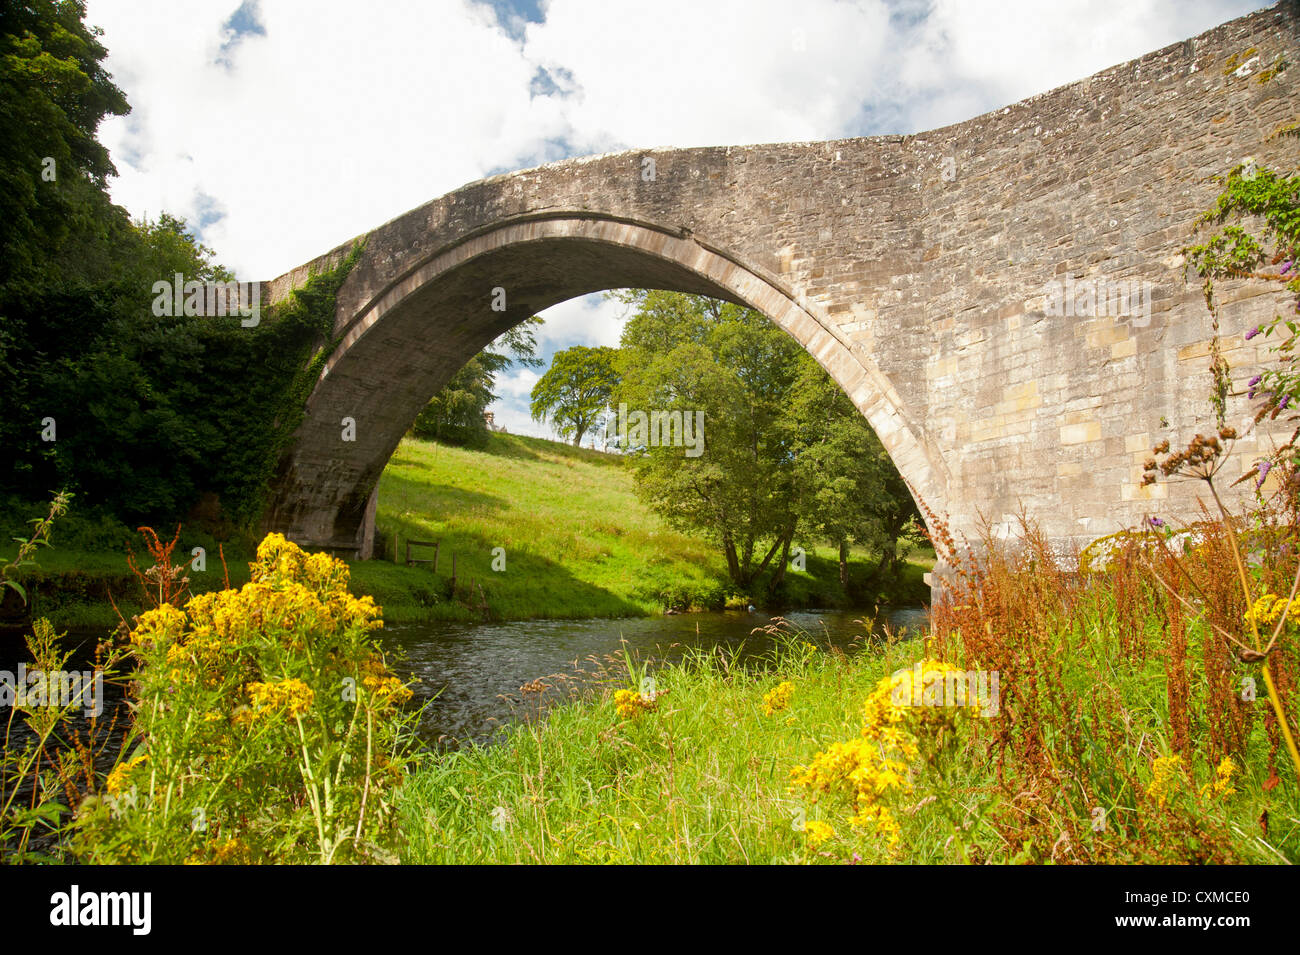 The Brig o' Doon, a late medieval single arched bridge over the River Doon, Alloway, Ayrshire. Scotland.  SCO 8614 Stock Photo